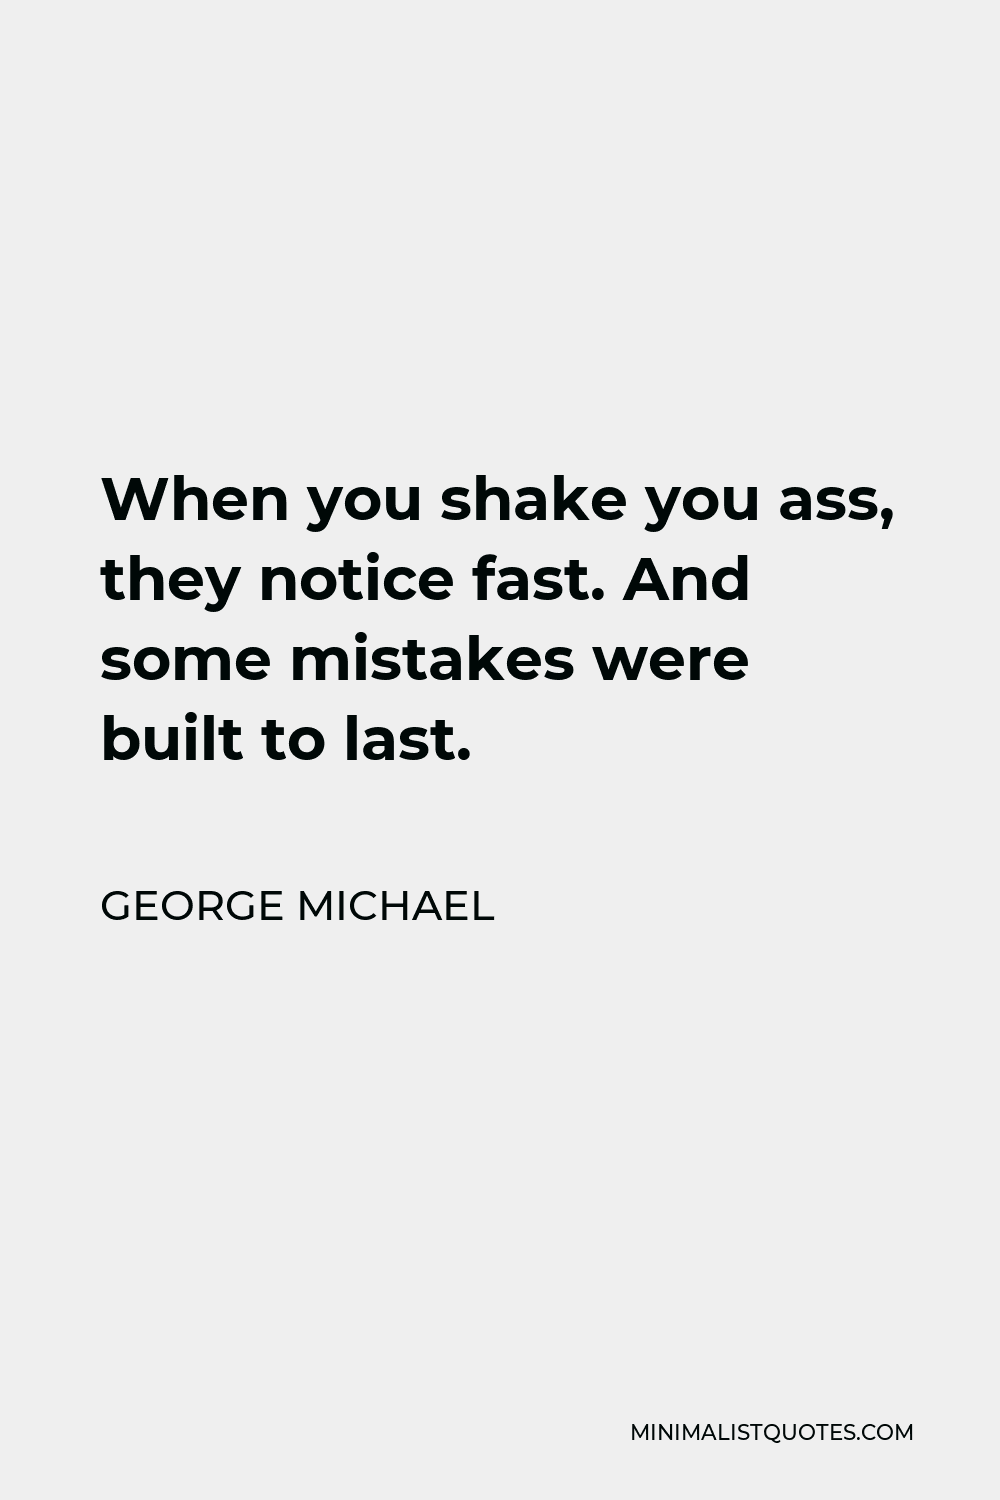 George Michael Quote - When you shake you ass, they notice fast. And some mistakes were built to last.